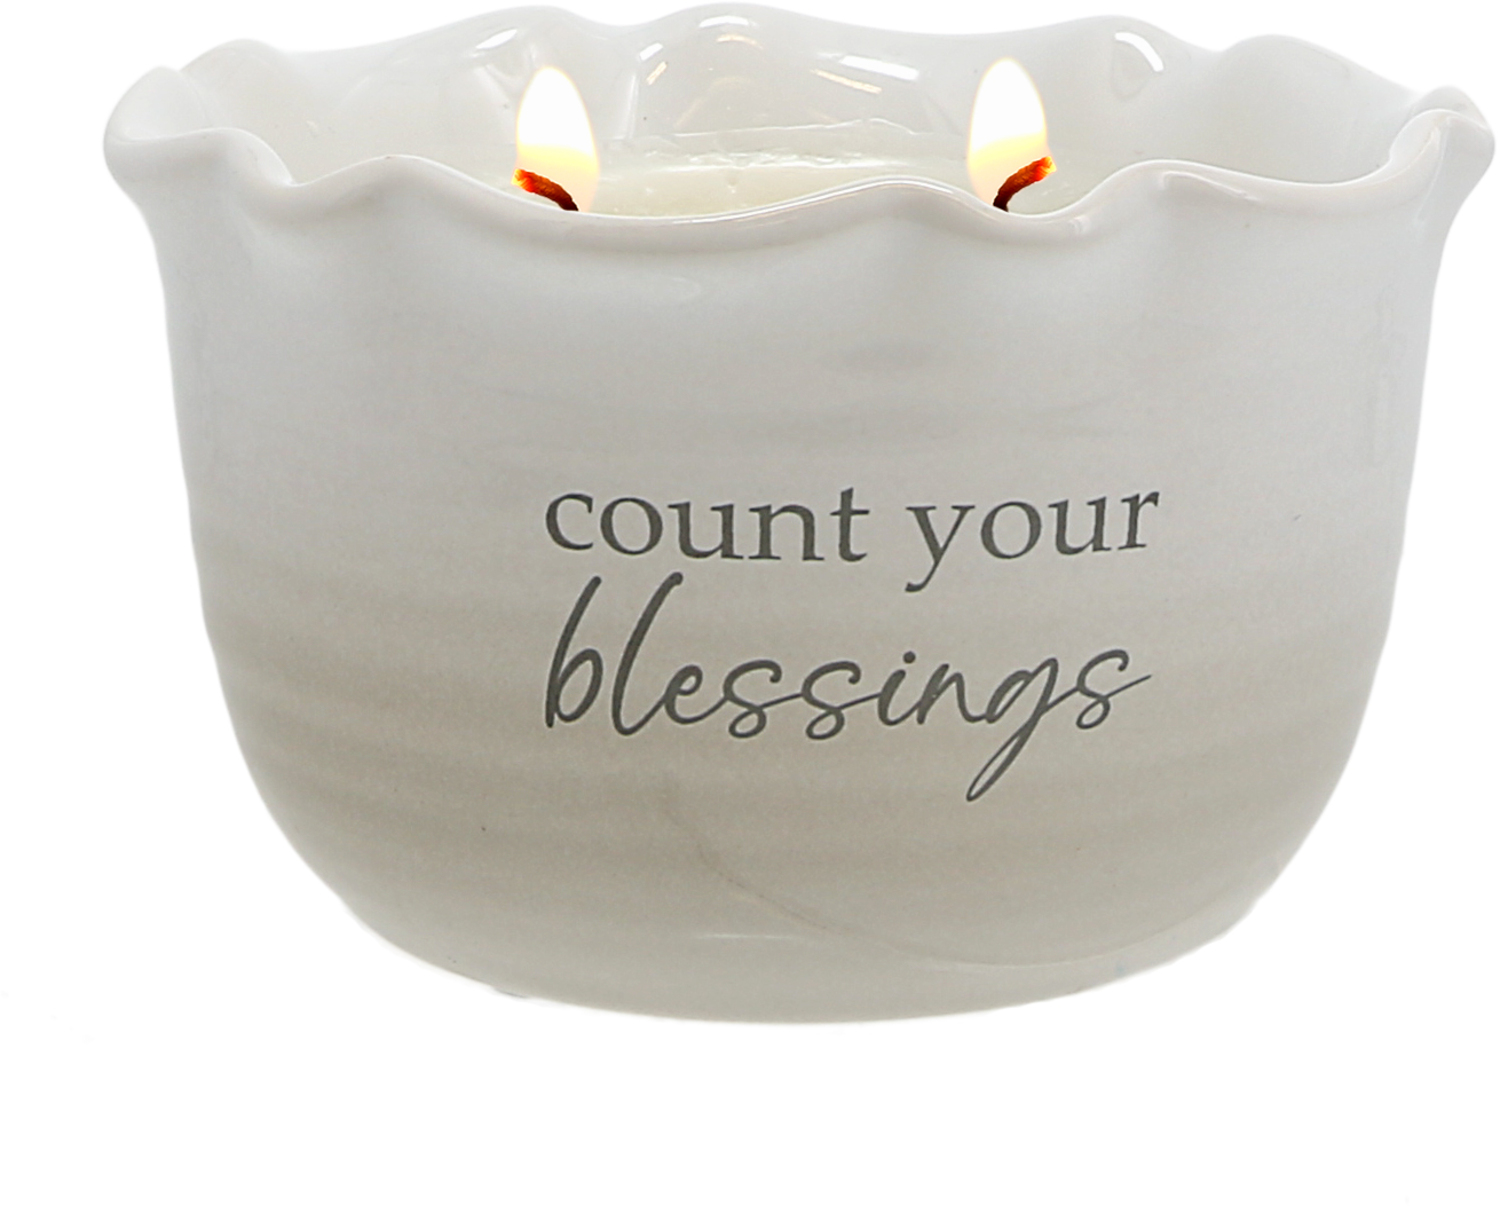 Blessings by Thoughts of Home - Blessings - 11 oz - 100% Soy Wax Reveal Candle
Scent: Tranquility